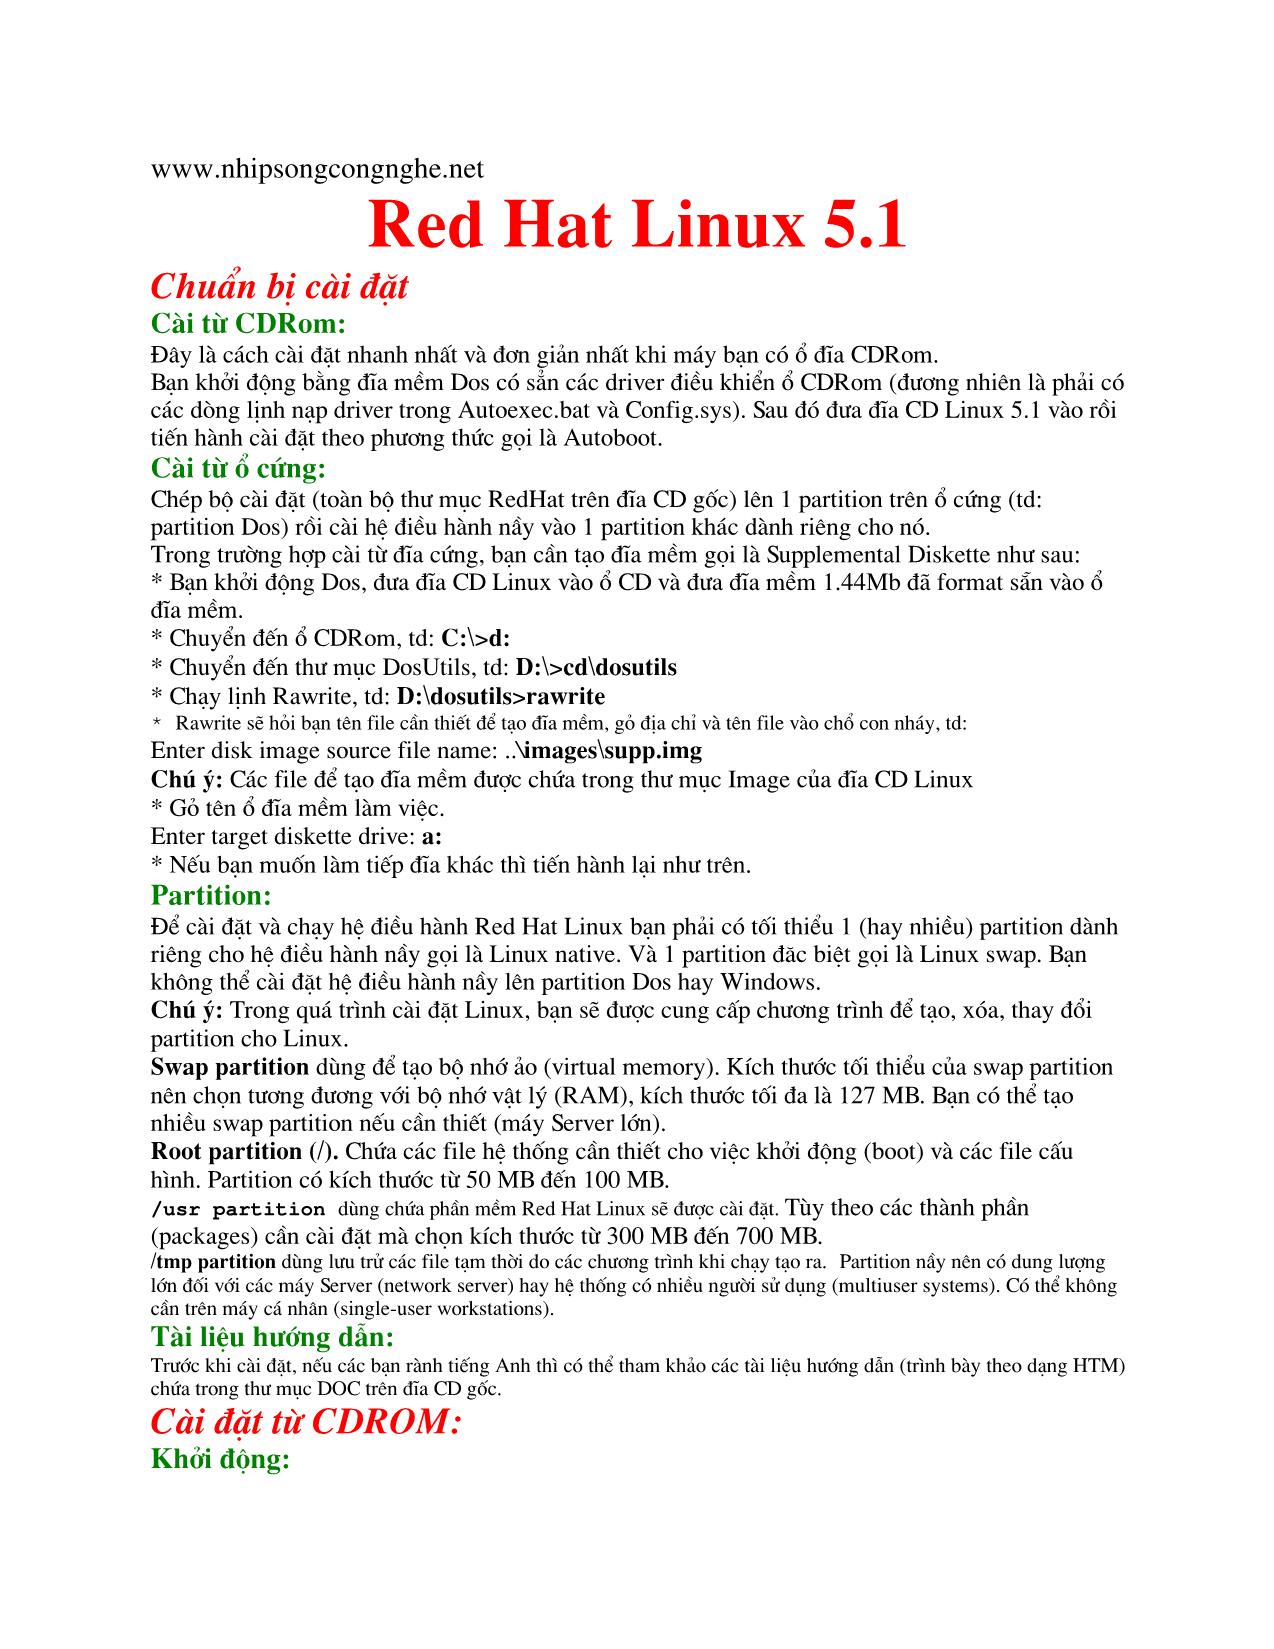 Red Hat Linux 5.1 trang 2